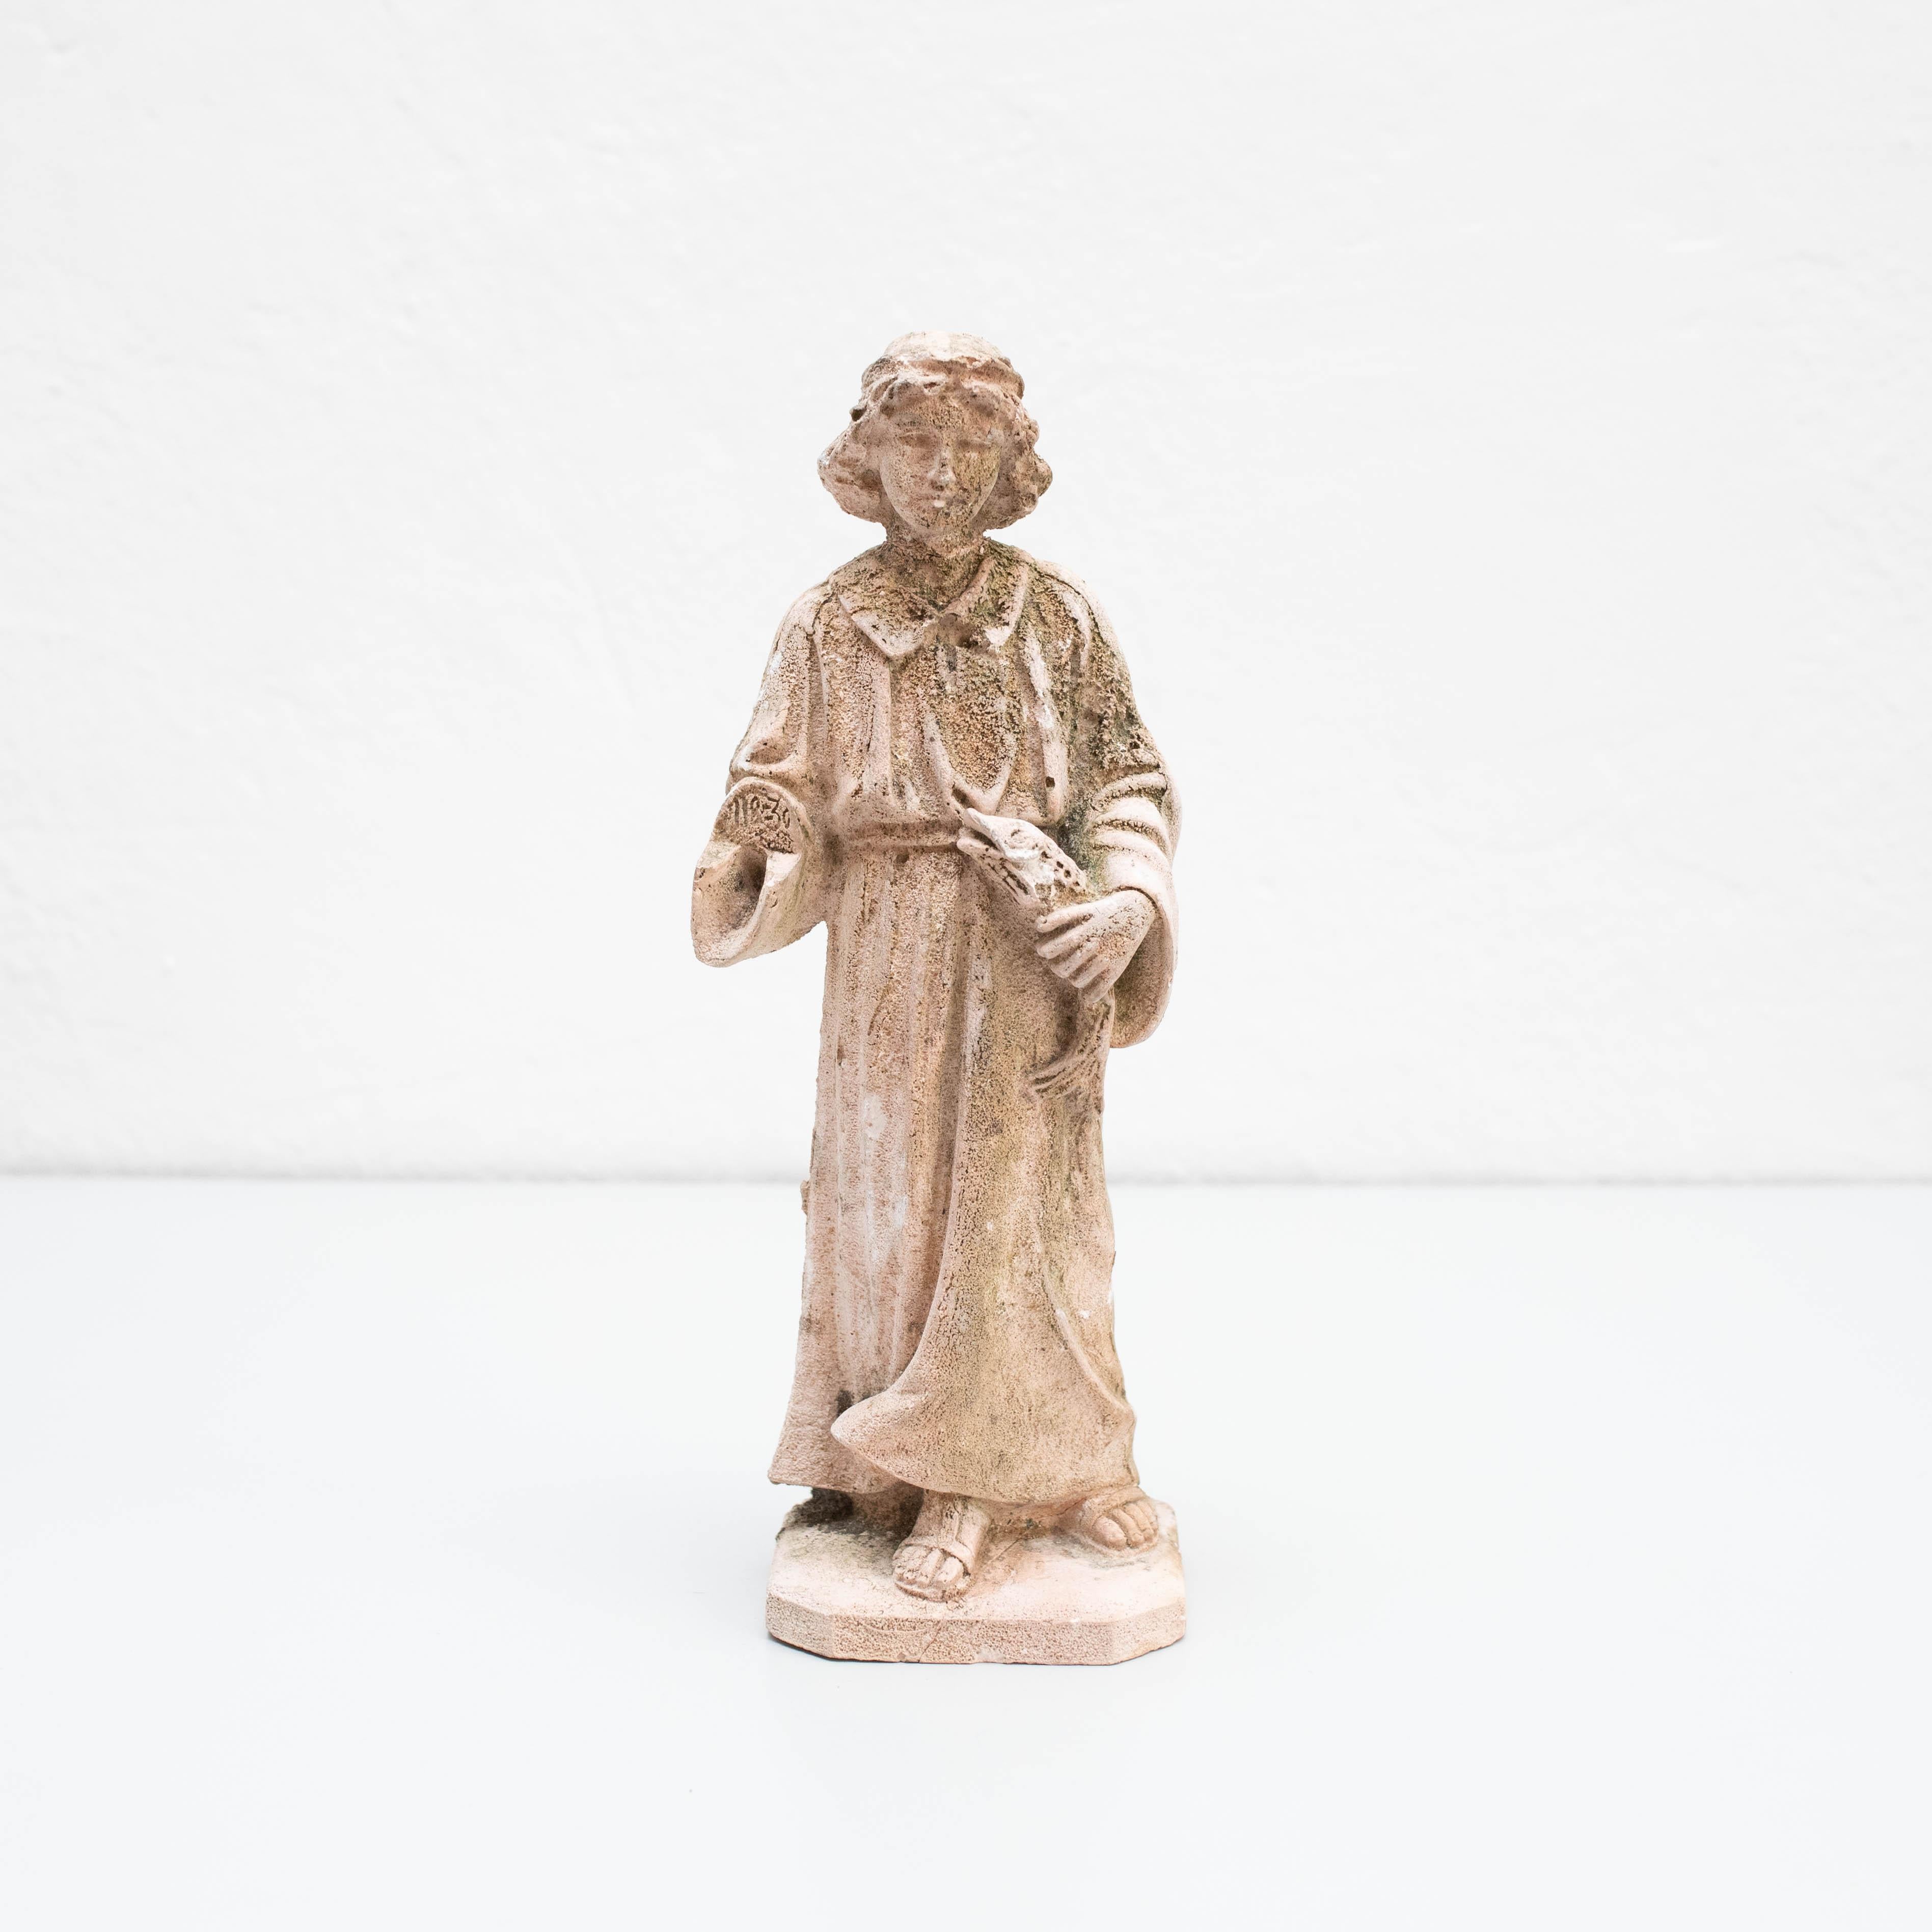 Traditional religious plaster figure.

Made in traditional Catalan atelier, Spain, circa 1930.

In original condition, with minor wear consistent with age and use, preserving a beautiful patina.

Materials:
Plaster.
 
Dimensions:
H 35